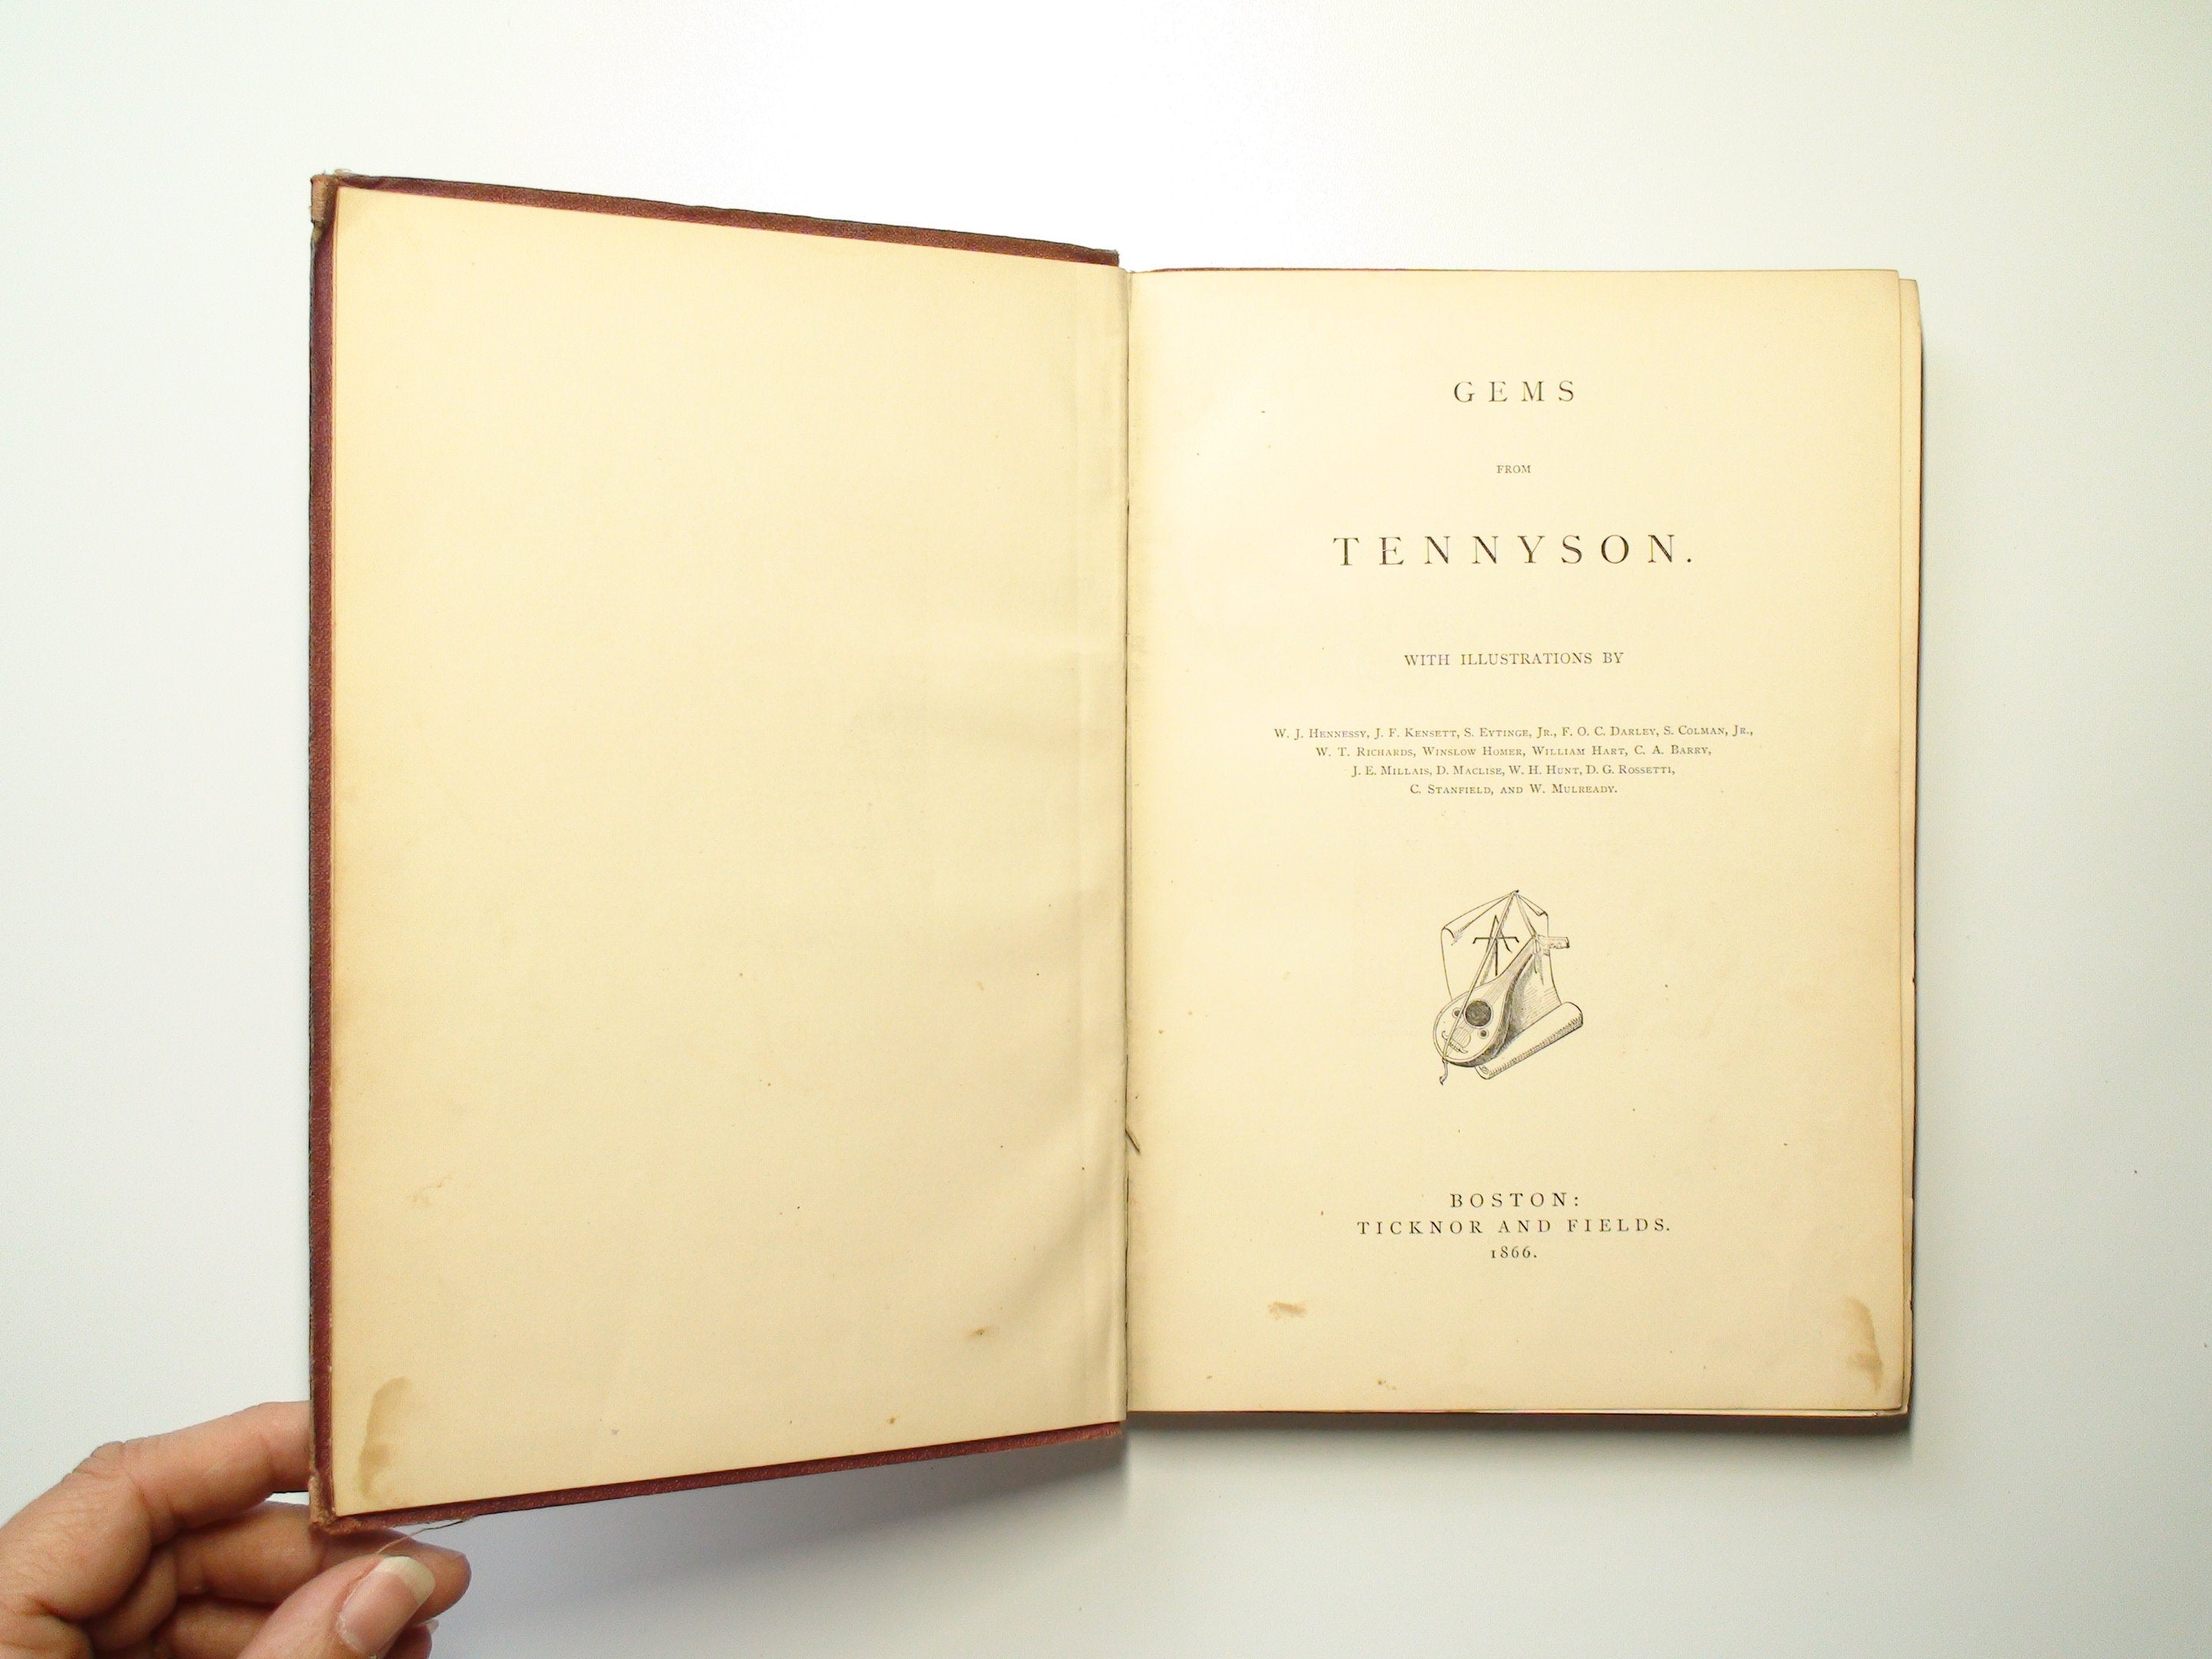 Gems from Tennyson, Illustrated, Ticknor and Fields, 1st Ed, 1866